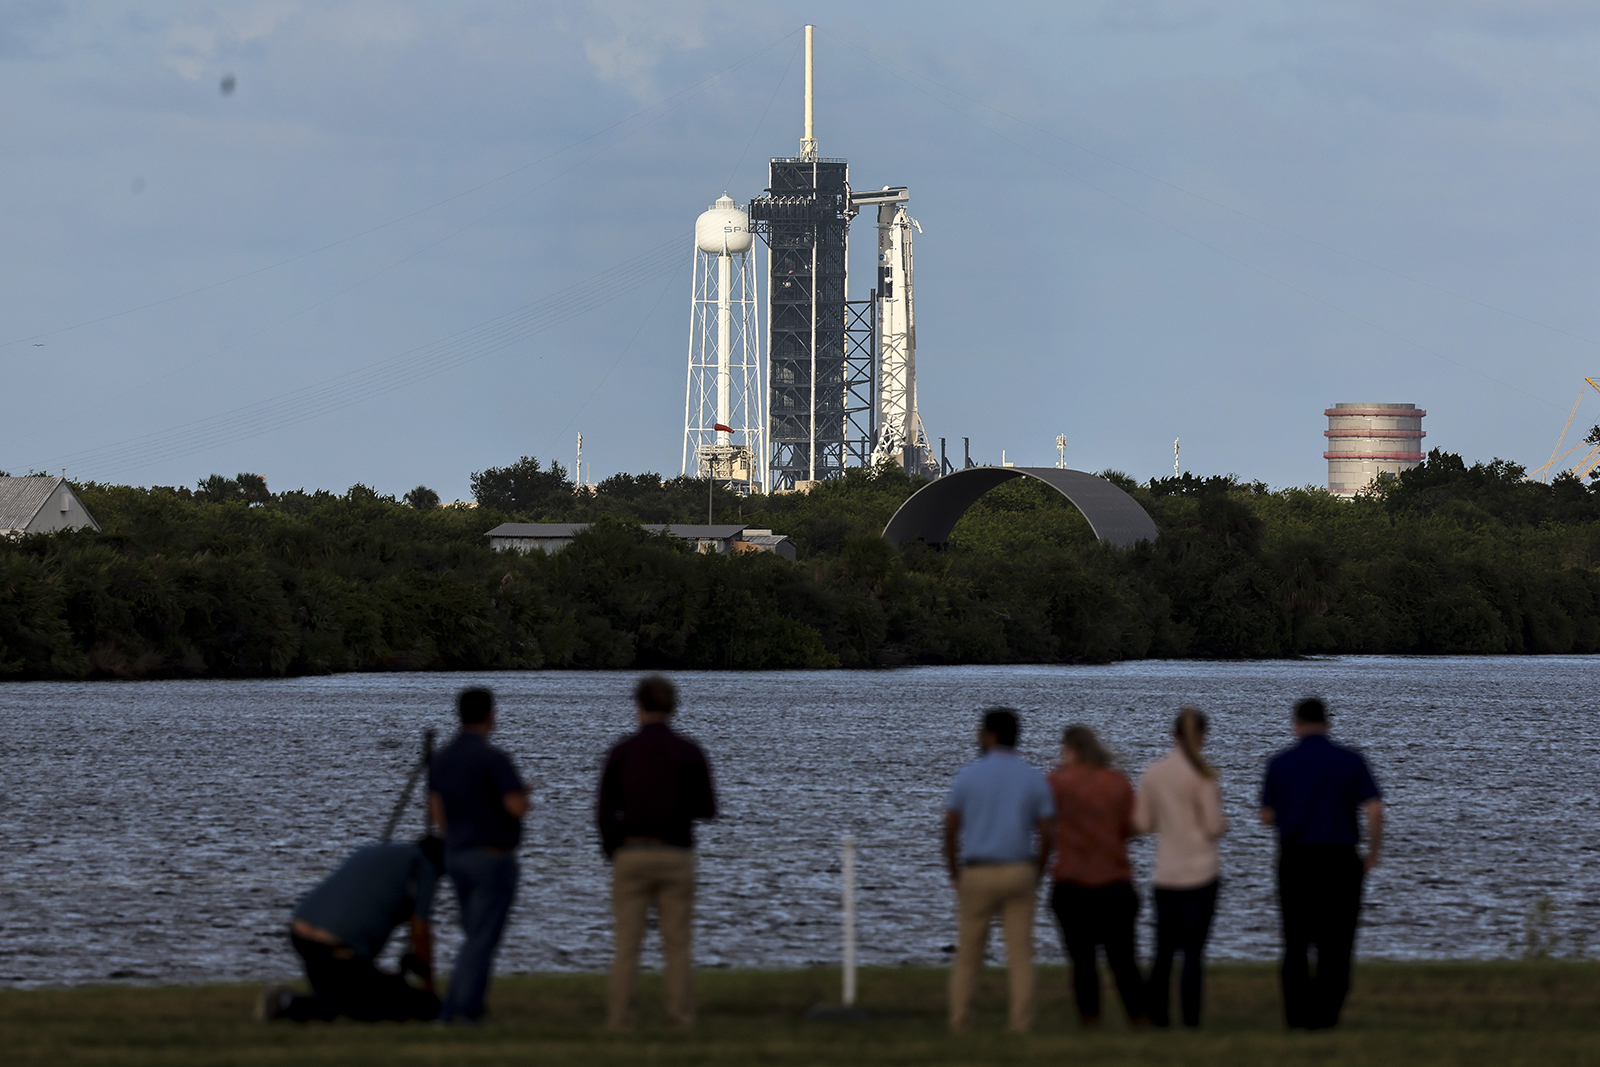 SpaceX’s Falcon 9 rocket with the Dragon spacecraft atop is seen as Space X and NASA prepare for the launch of the Crew-5 mission, on October 4 in Cape Canaveral, Florida. 